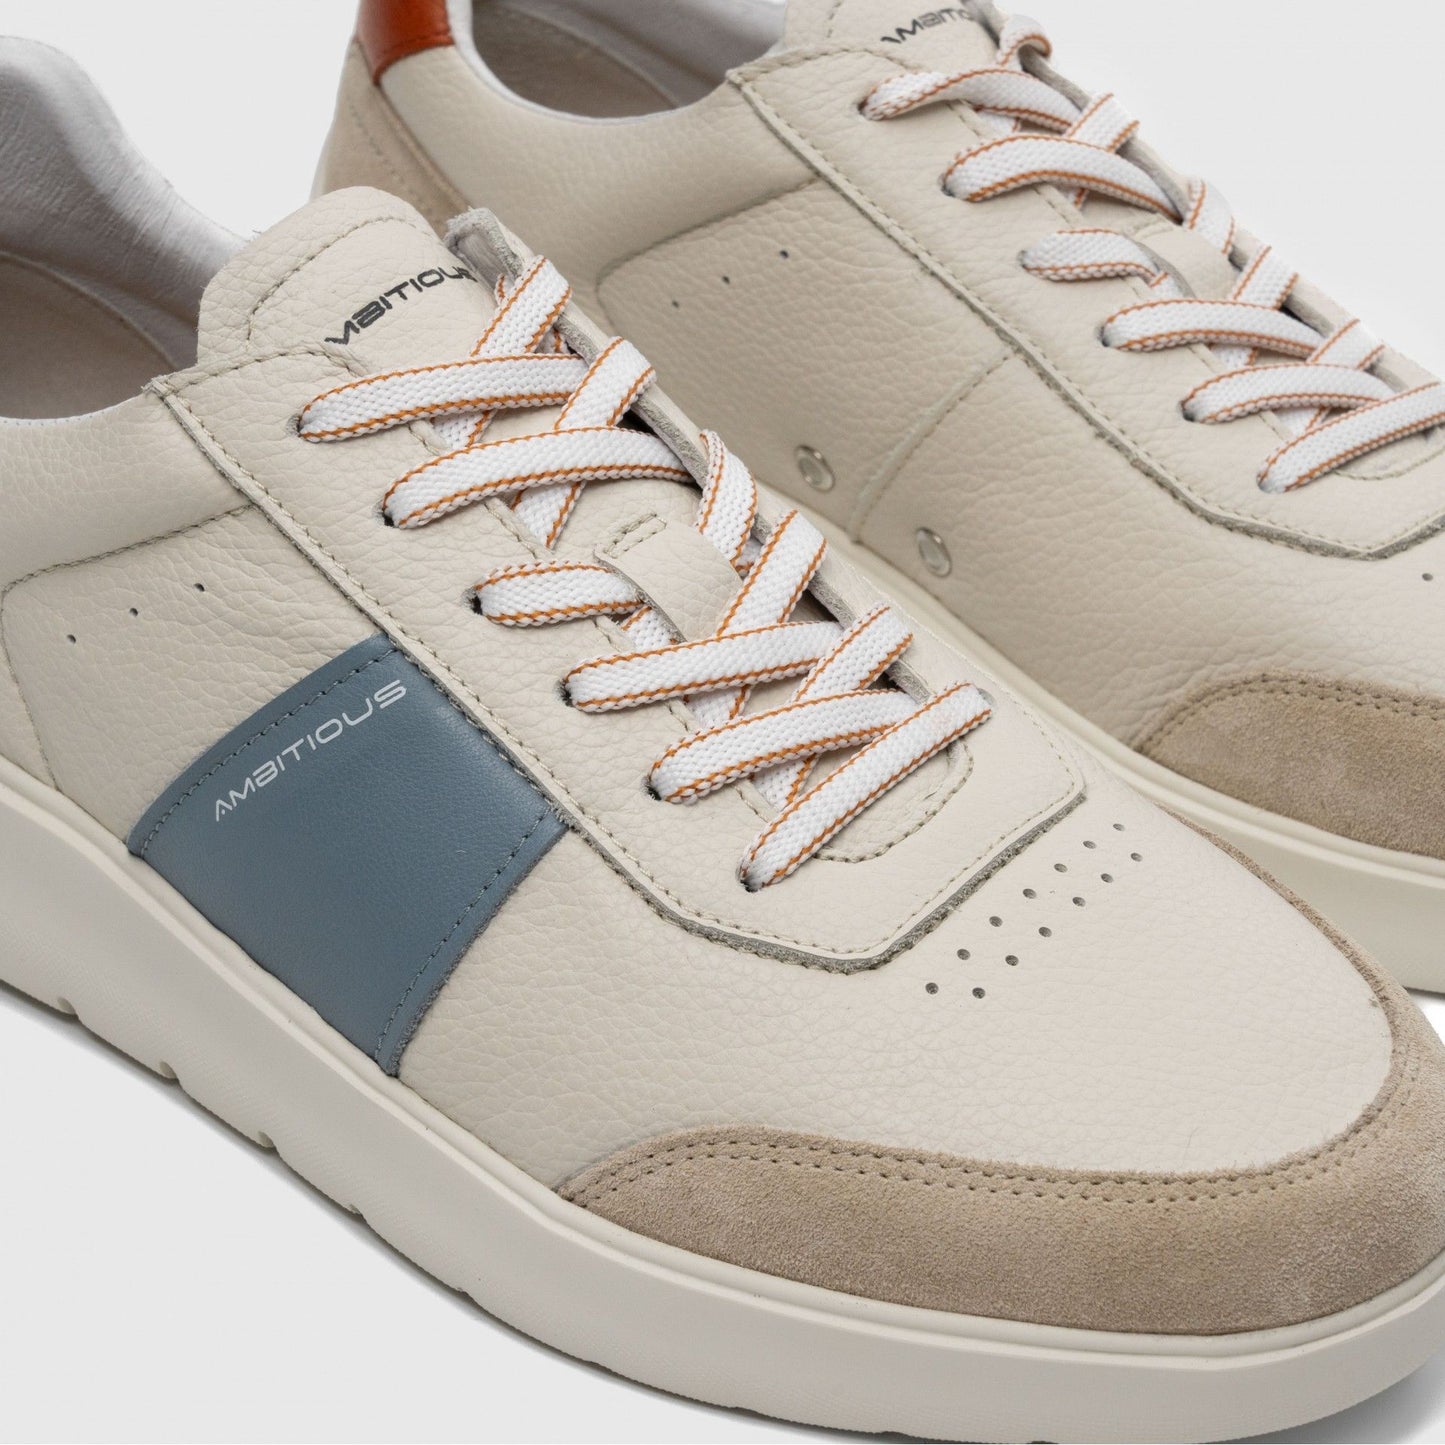 Ambitious 12863 6923 Beige / Blue / Brick Trainers